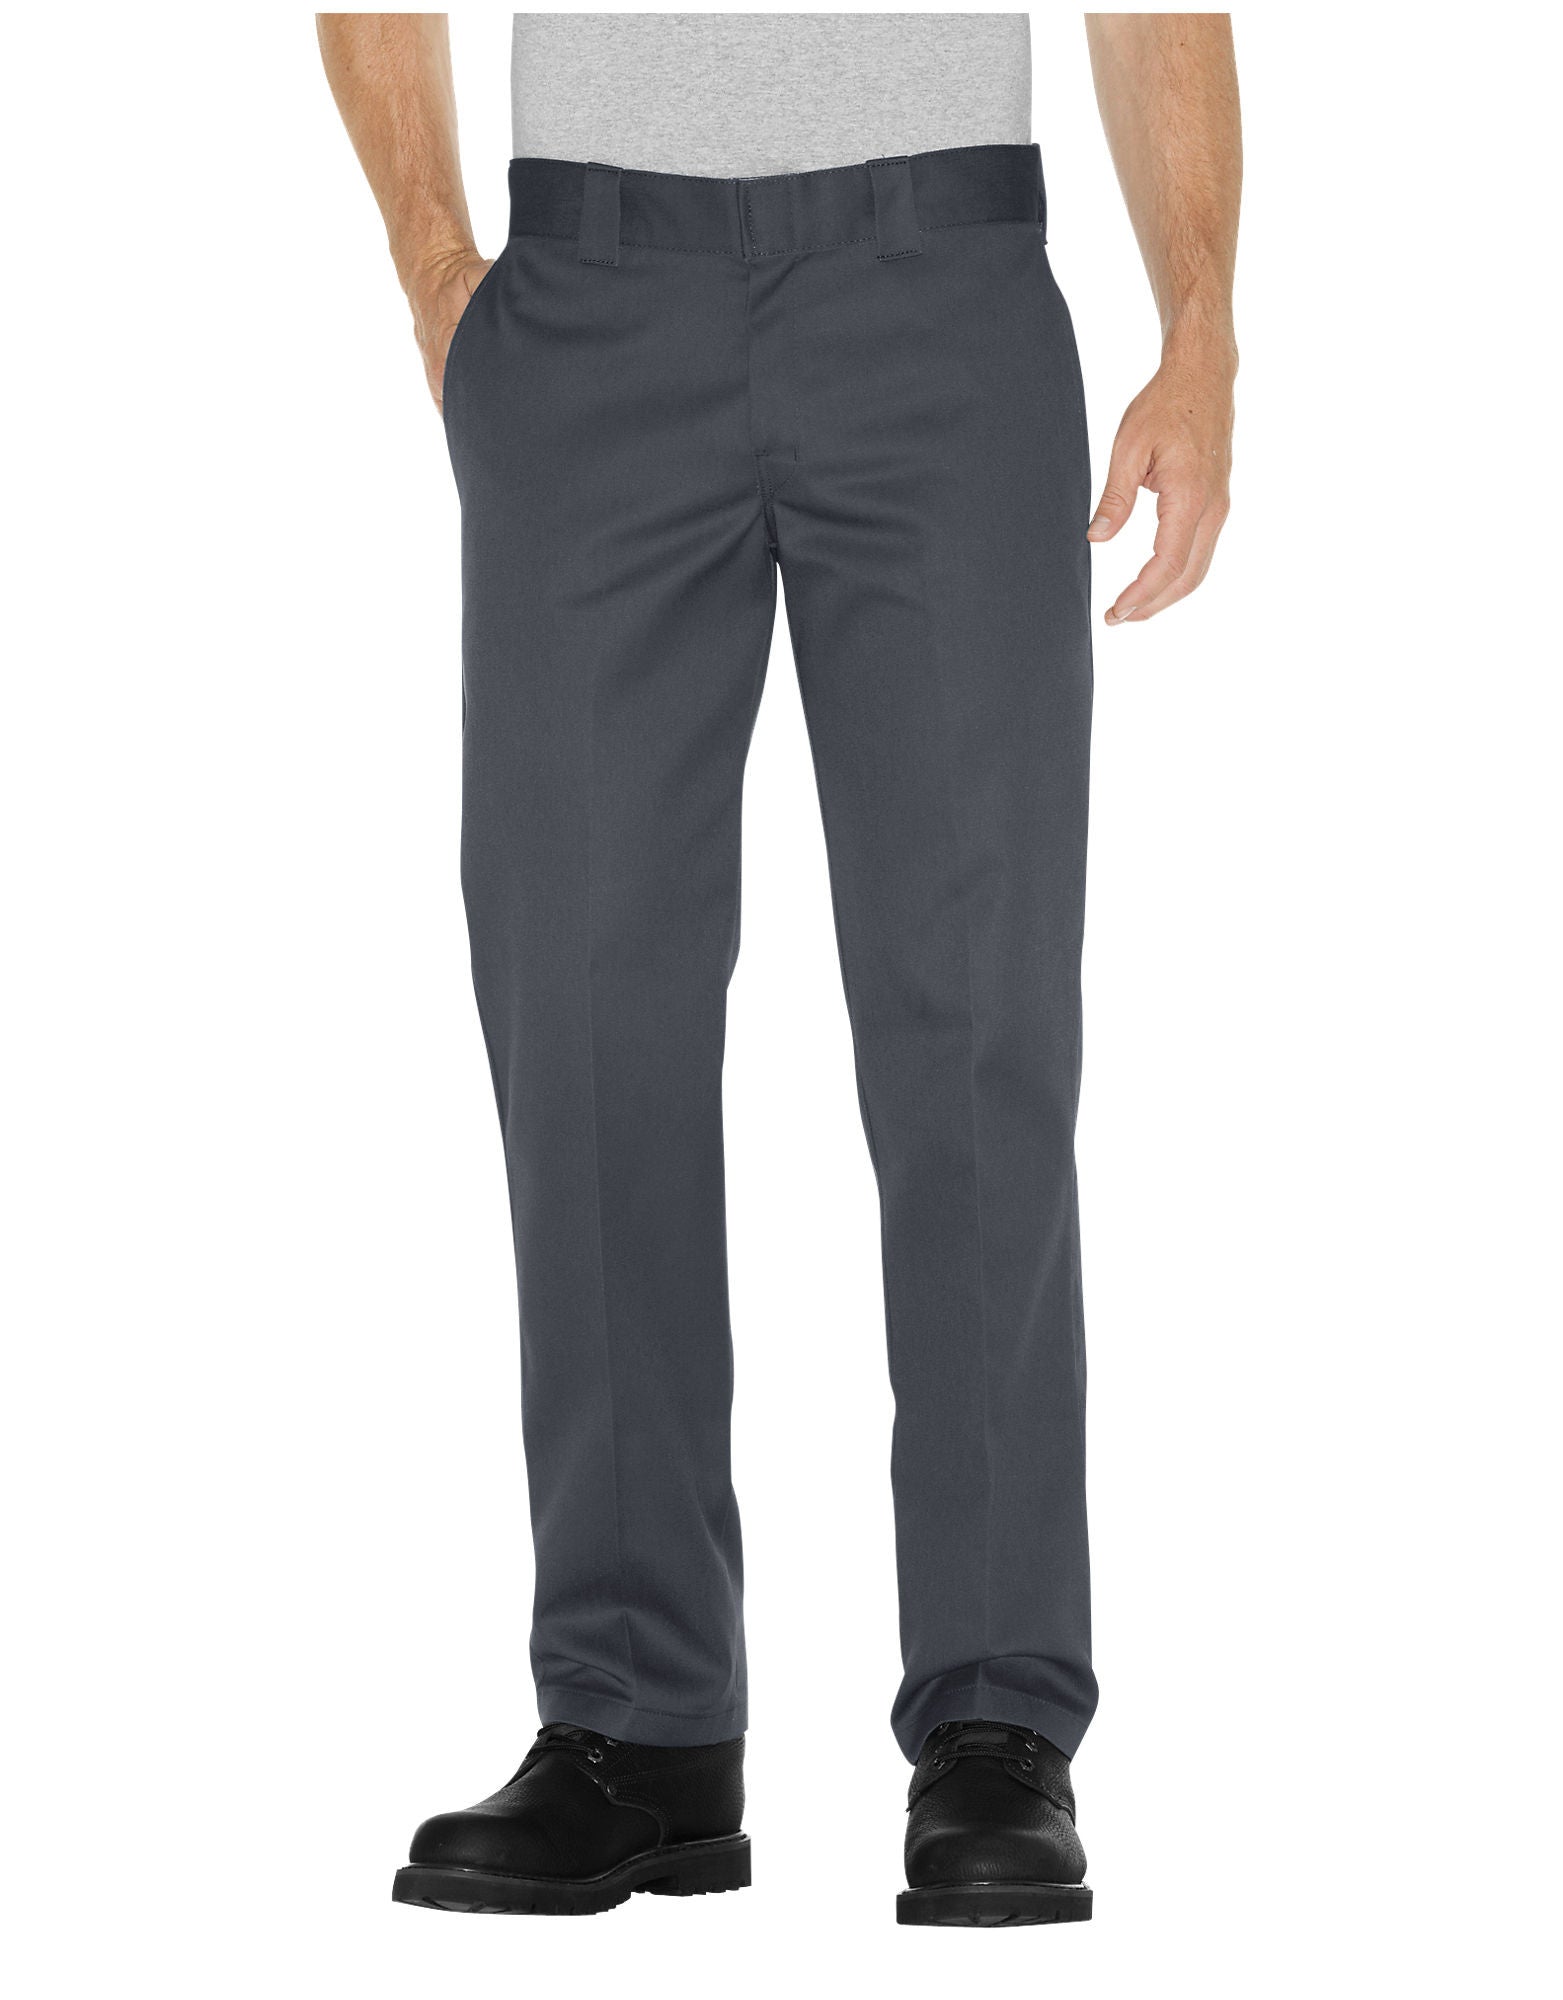 Dickies 873 Slim Straight Fit Charcoal Work Pants – Famous Rock Shop